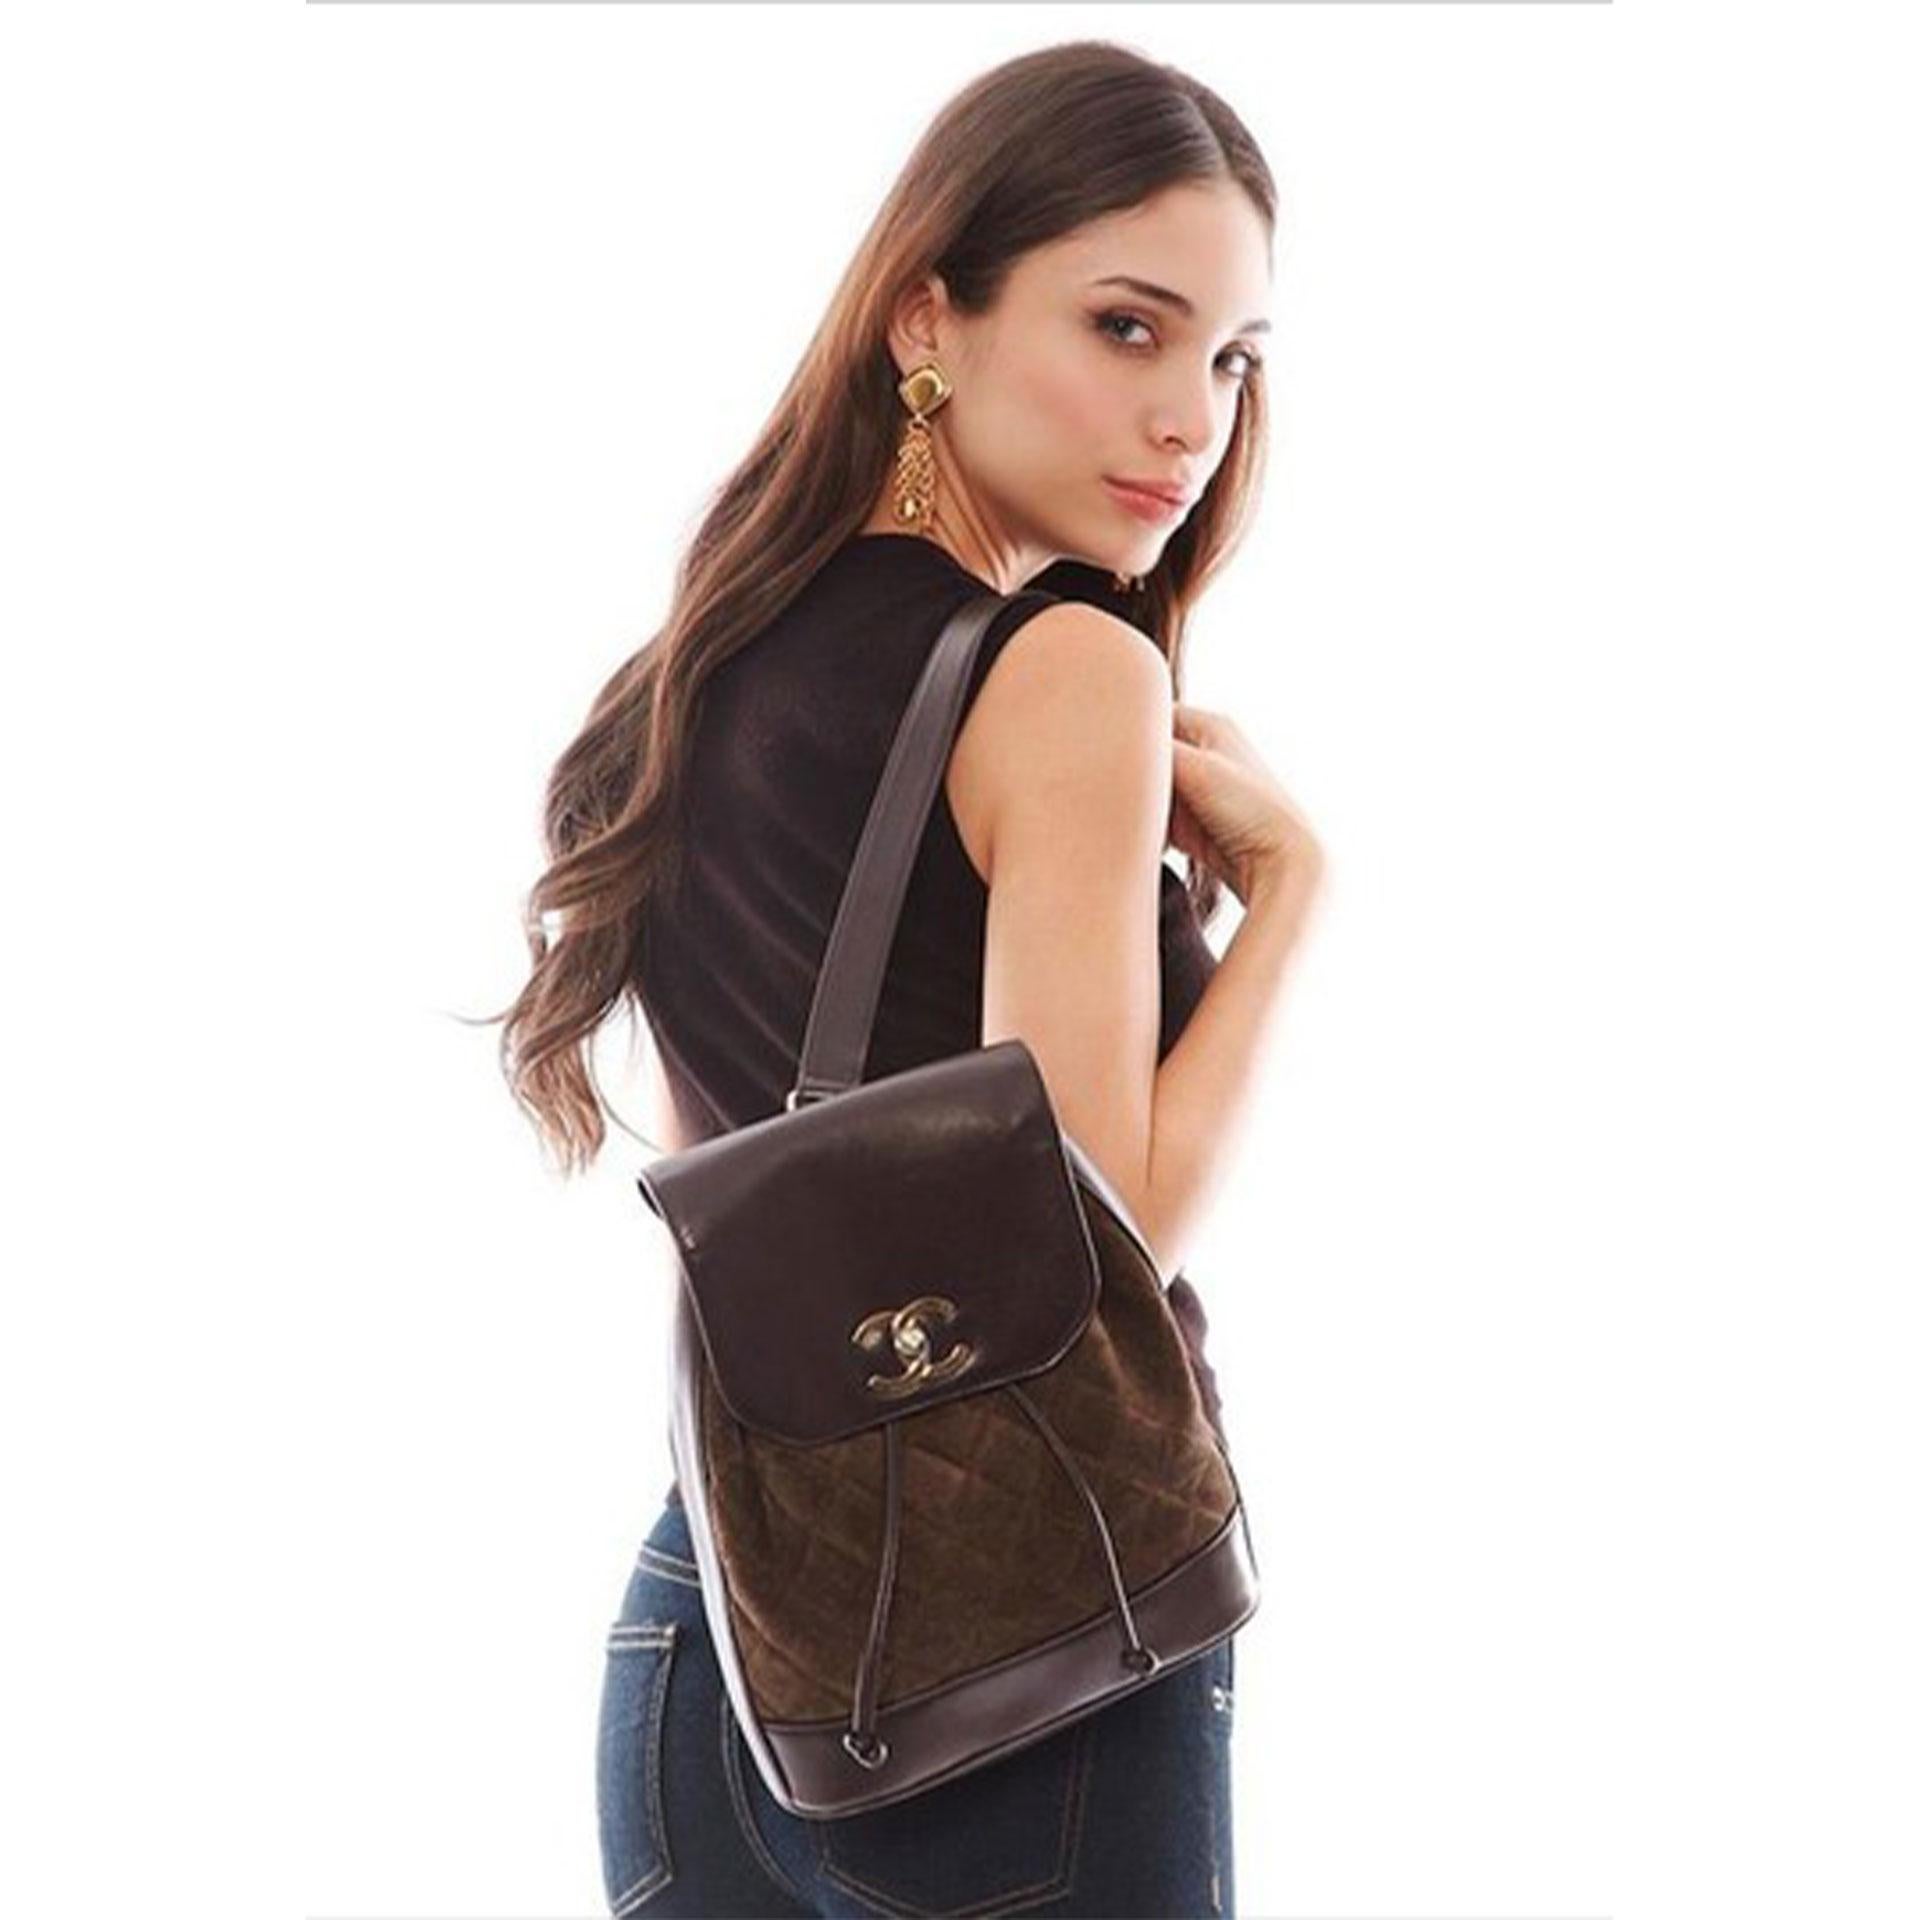 Material: Leather
Style Name: Backpack
Color: Olive and Brown
Measurements: 4